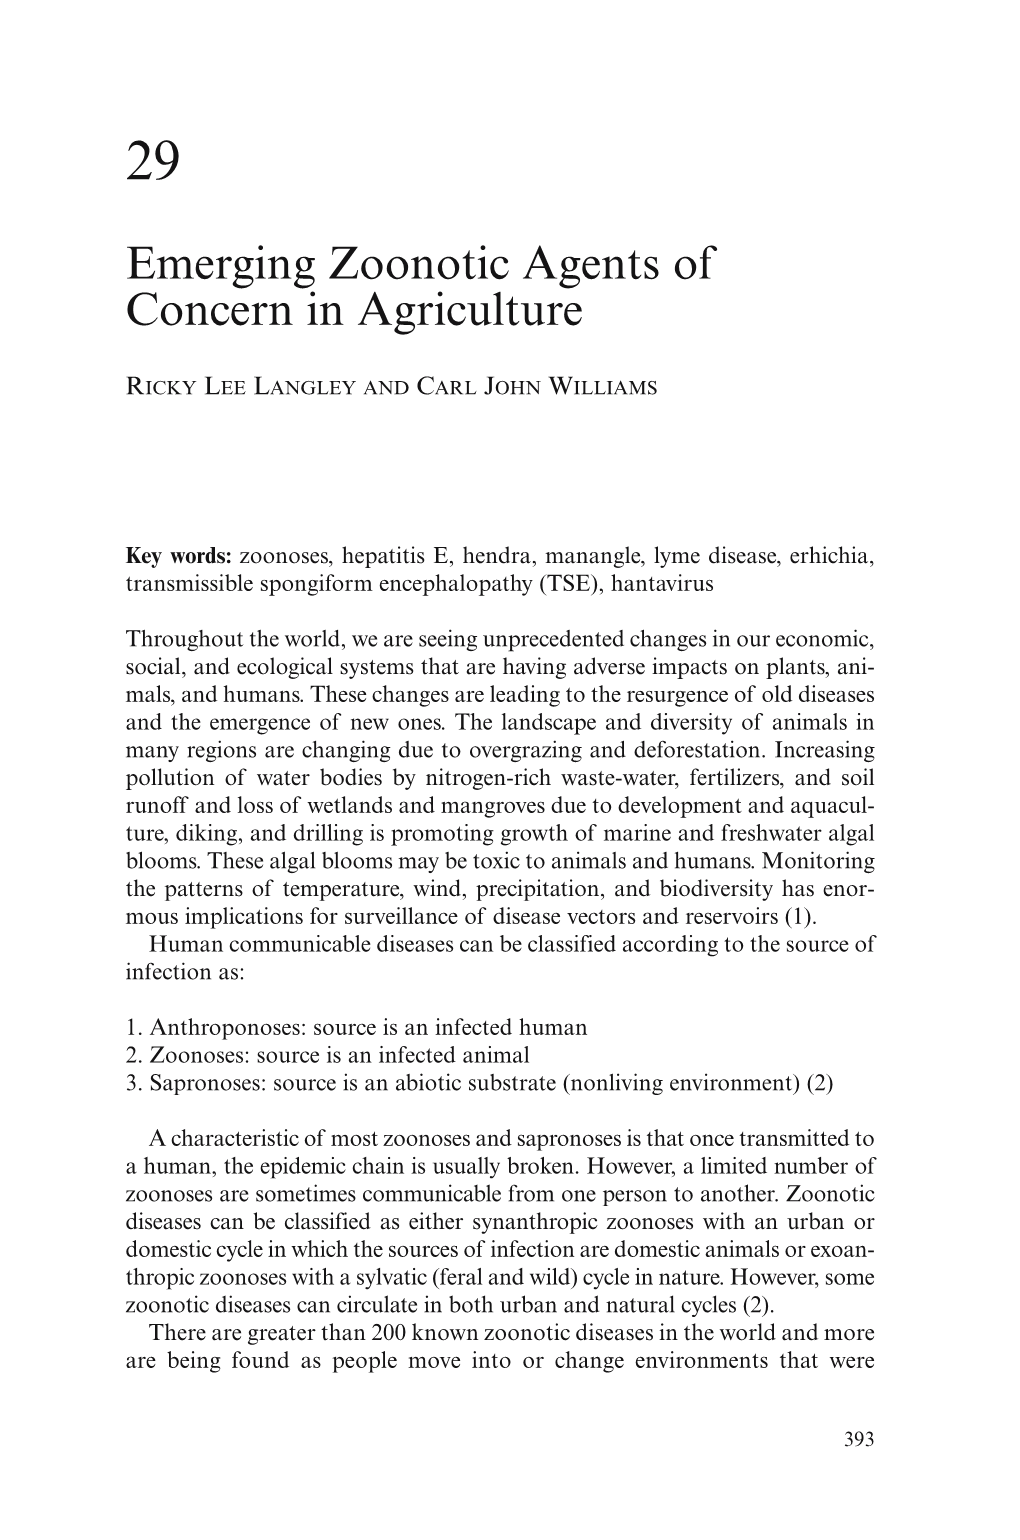 Emerging Zoonotic Agents of Concern in Agriculture